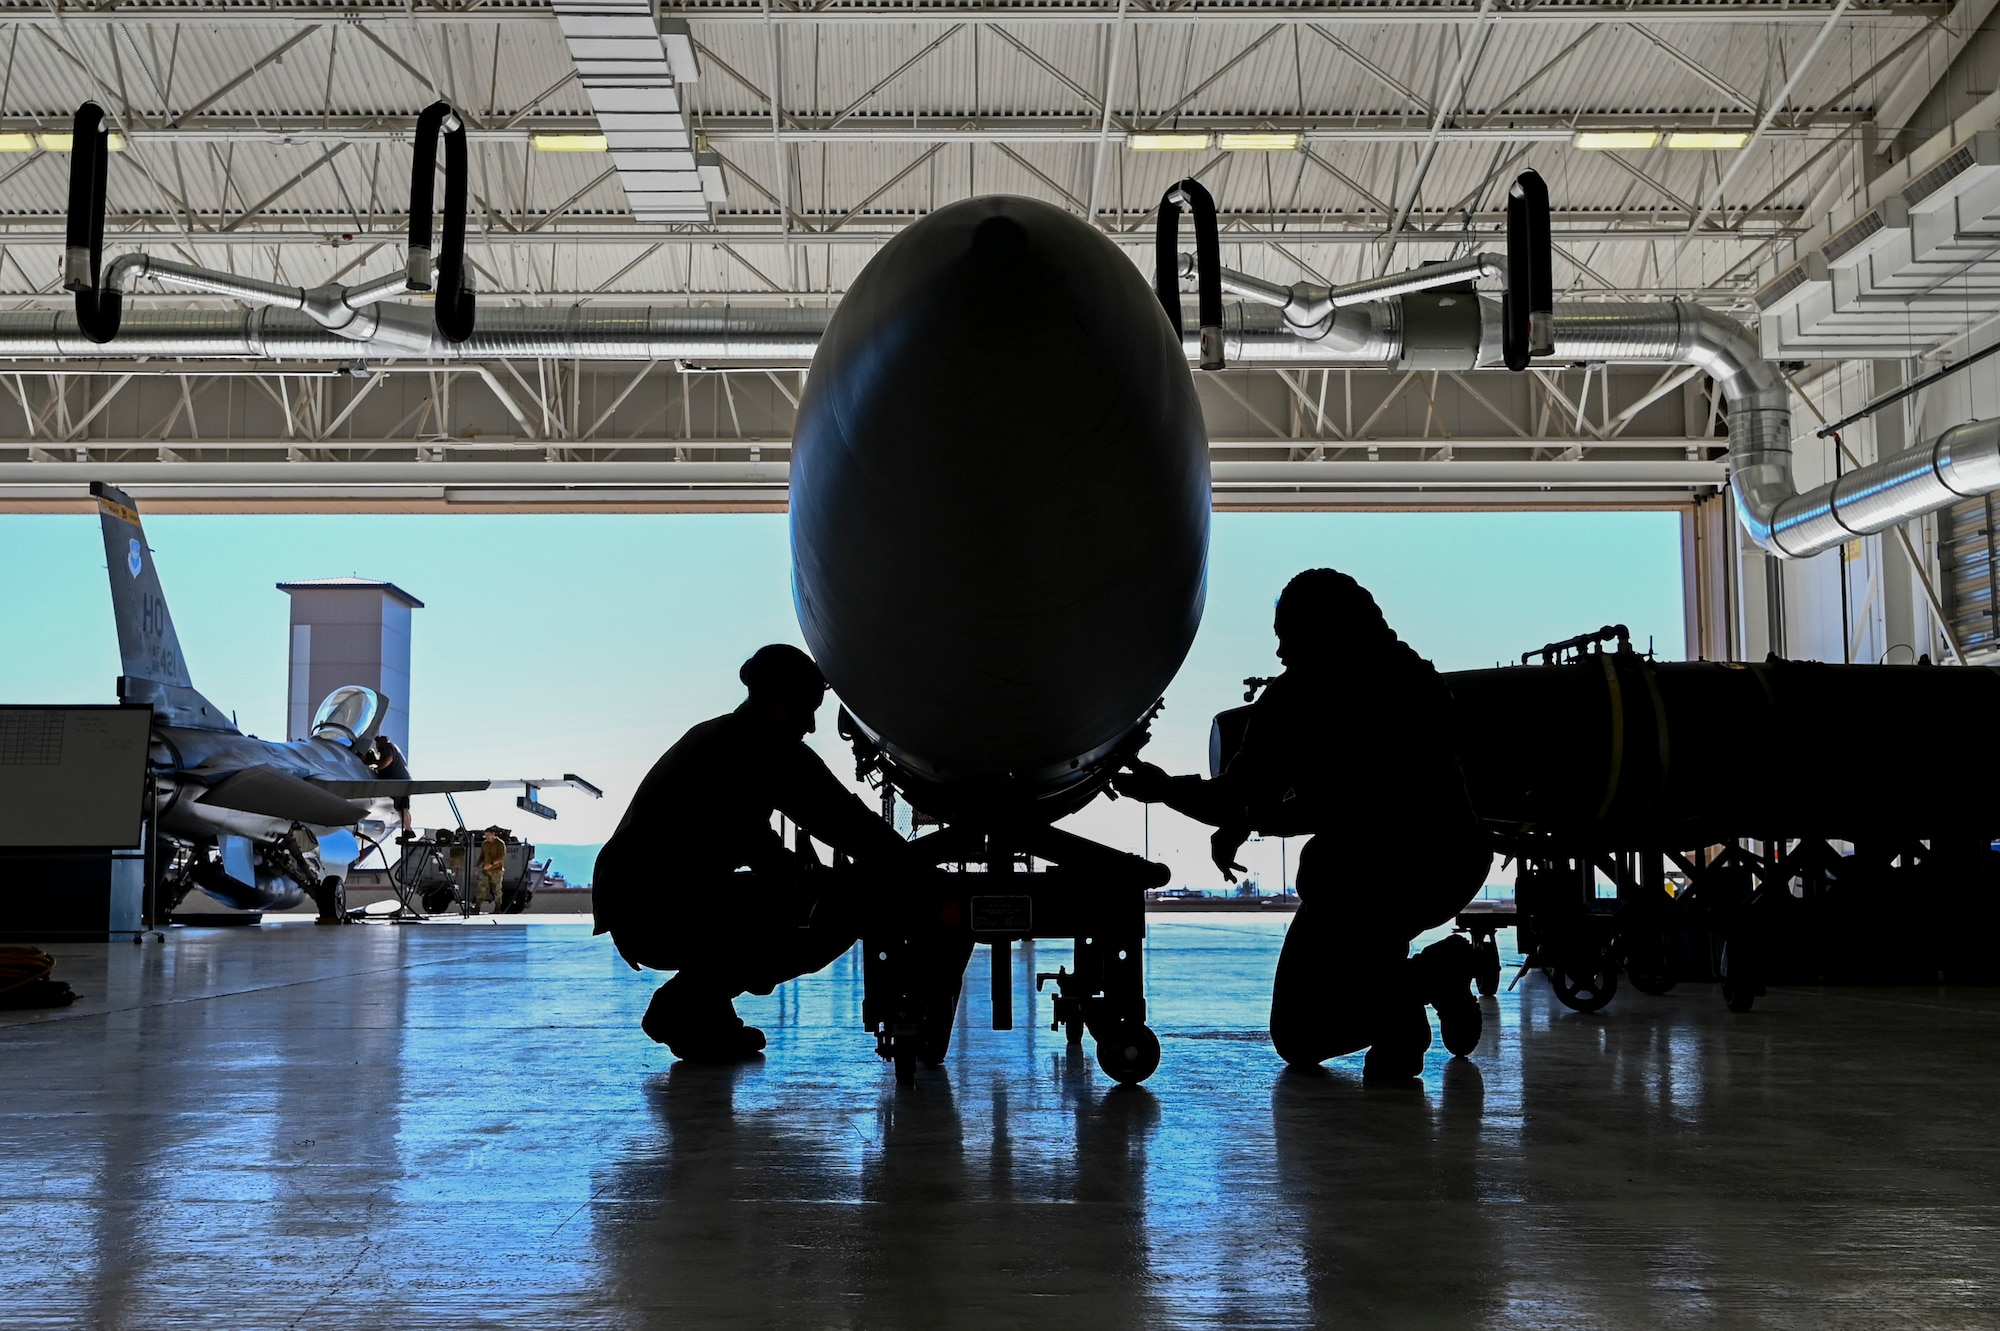 U.S. Air Force Staff Sgt. Thelma Bradshaw, left, and U.S. Air Force Tech. Sgt. Kalani Leetom, 49th Component Maintenance Squadron fuels craftsmen, inspect an F-16 Viper fuel tank at Holloman Air Force Base, New Mexico, Feb. 8, 2023.The 49th CMS fuels shop is in charge of maintaining and supplying anything fuel-related to all F-16 Vipers on base. (U.S. Air Force photo by Airman 1st Class Isaiah Pedrazzini)